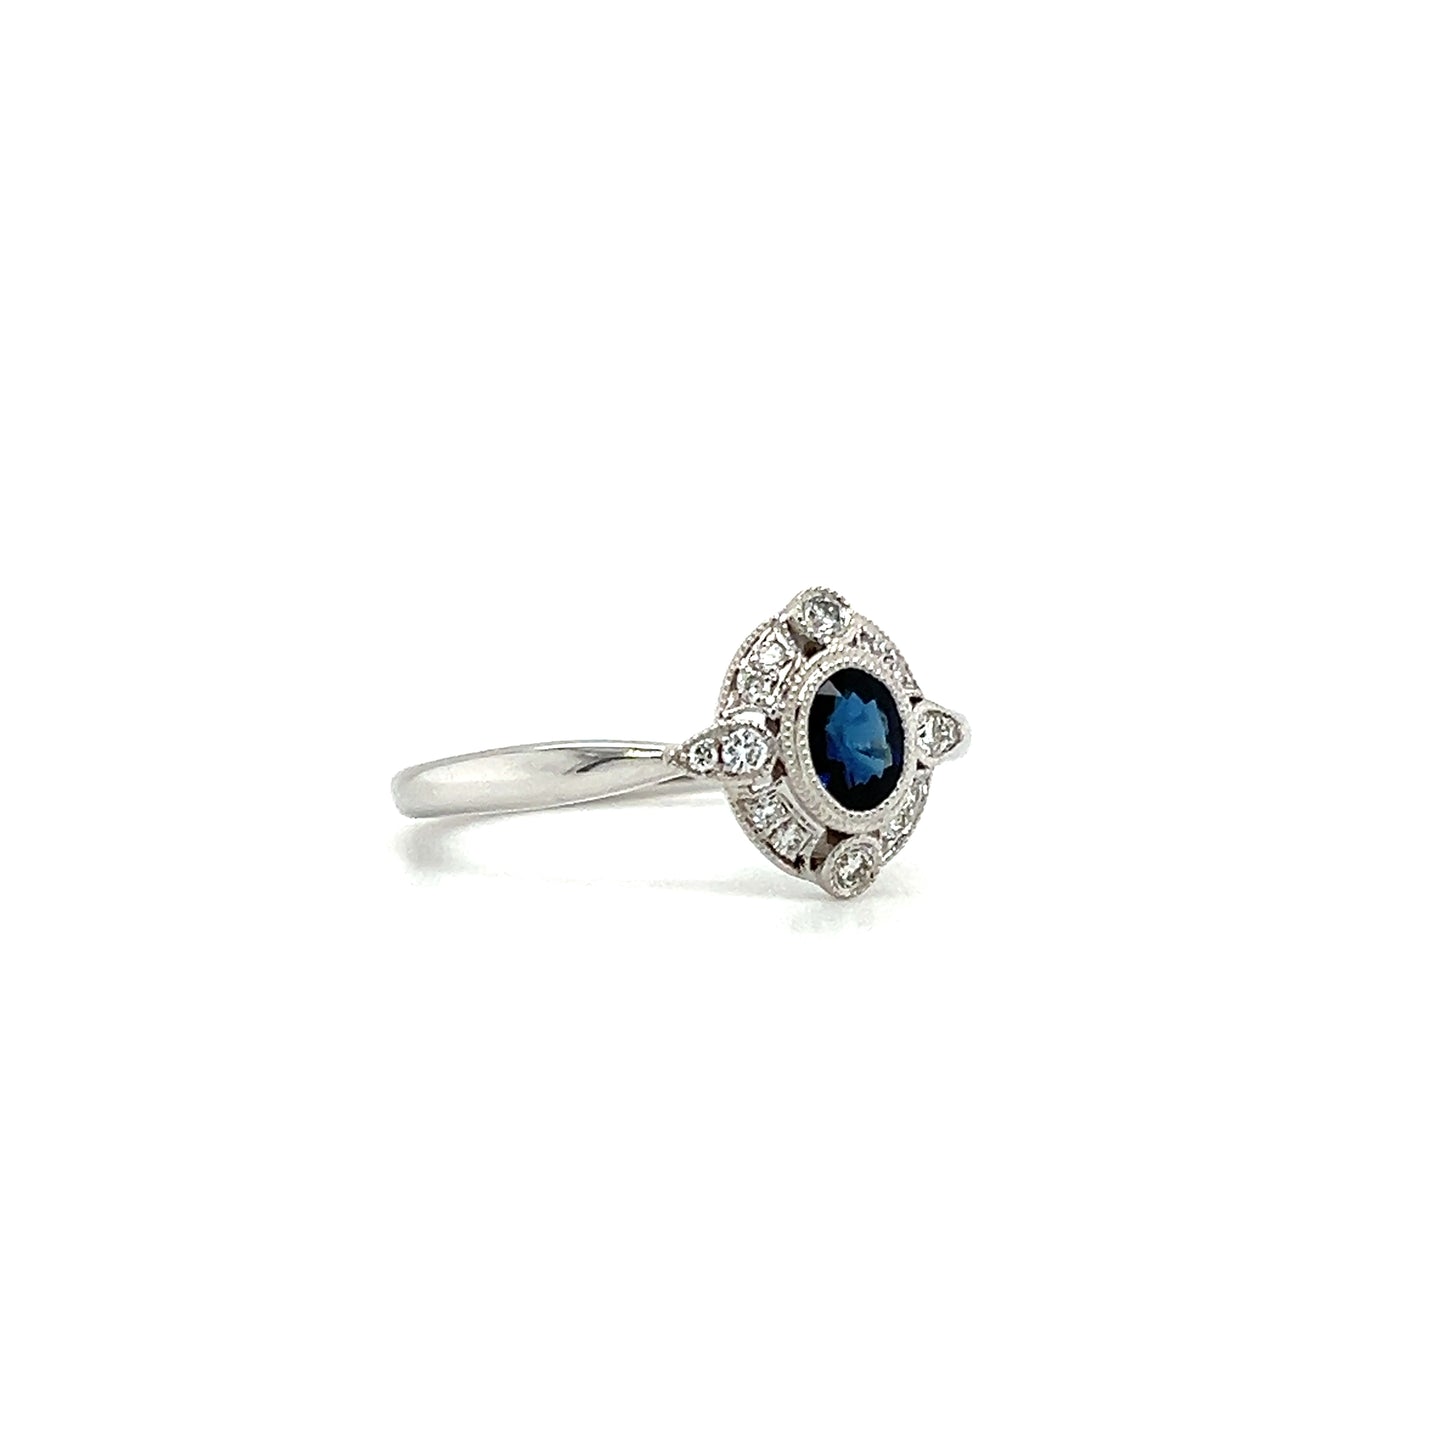 Blue Sapphire Ring with Milgrain Diamond Halo in 14K White Gold Left Side View